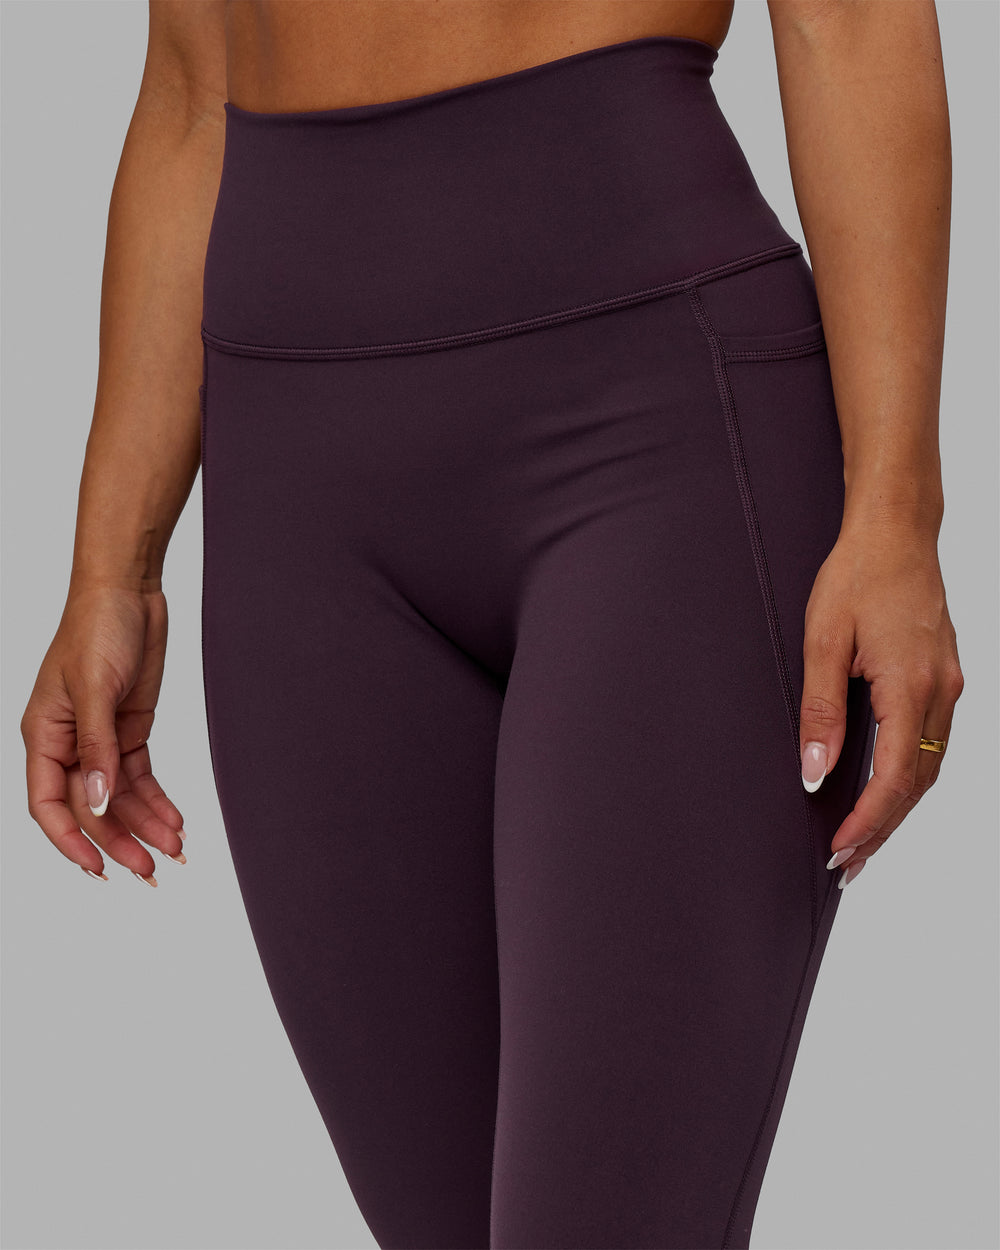 Woman wearing Fusion Full Length Tights - Midnight Plum